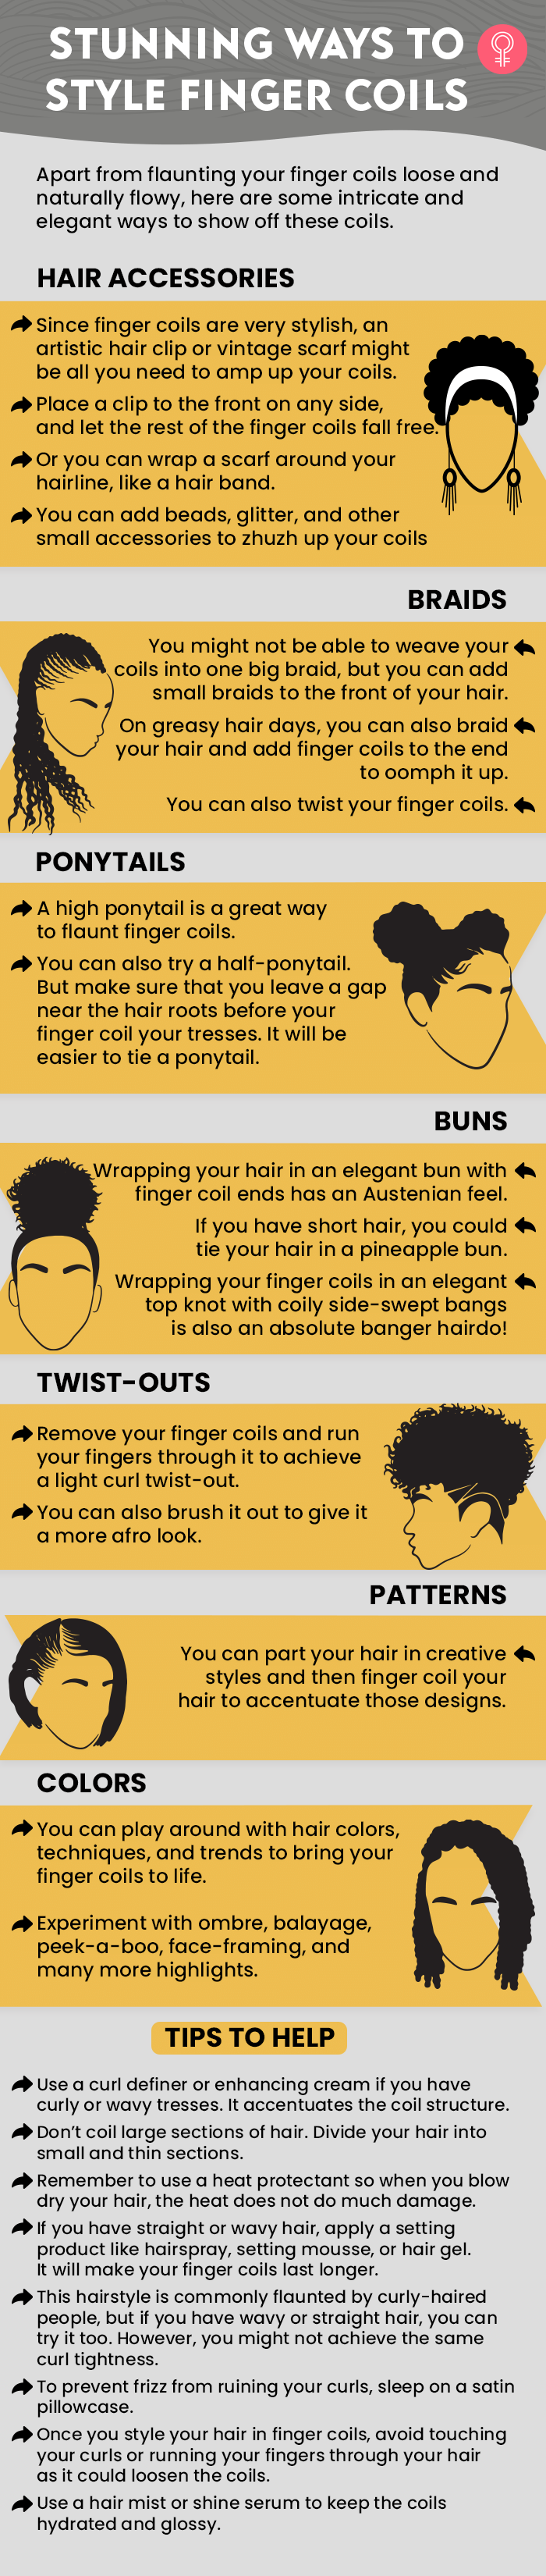 7 stunning ways to style finger coils [infographic]